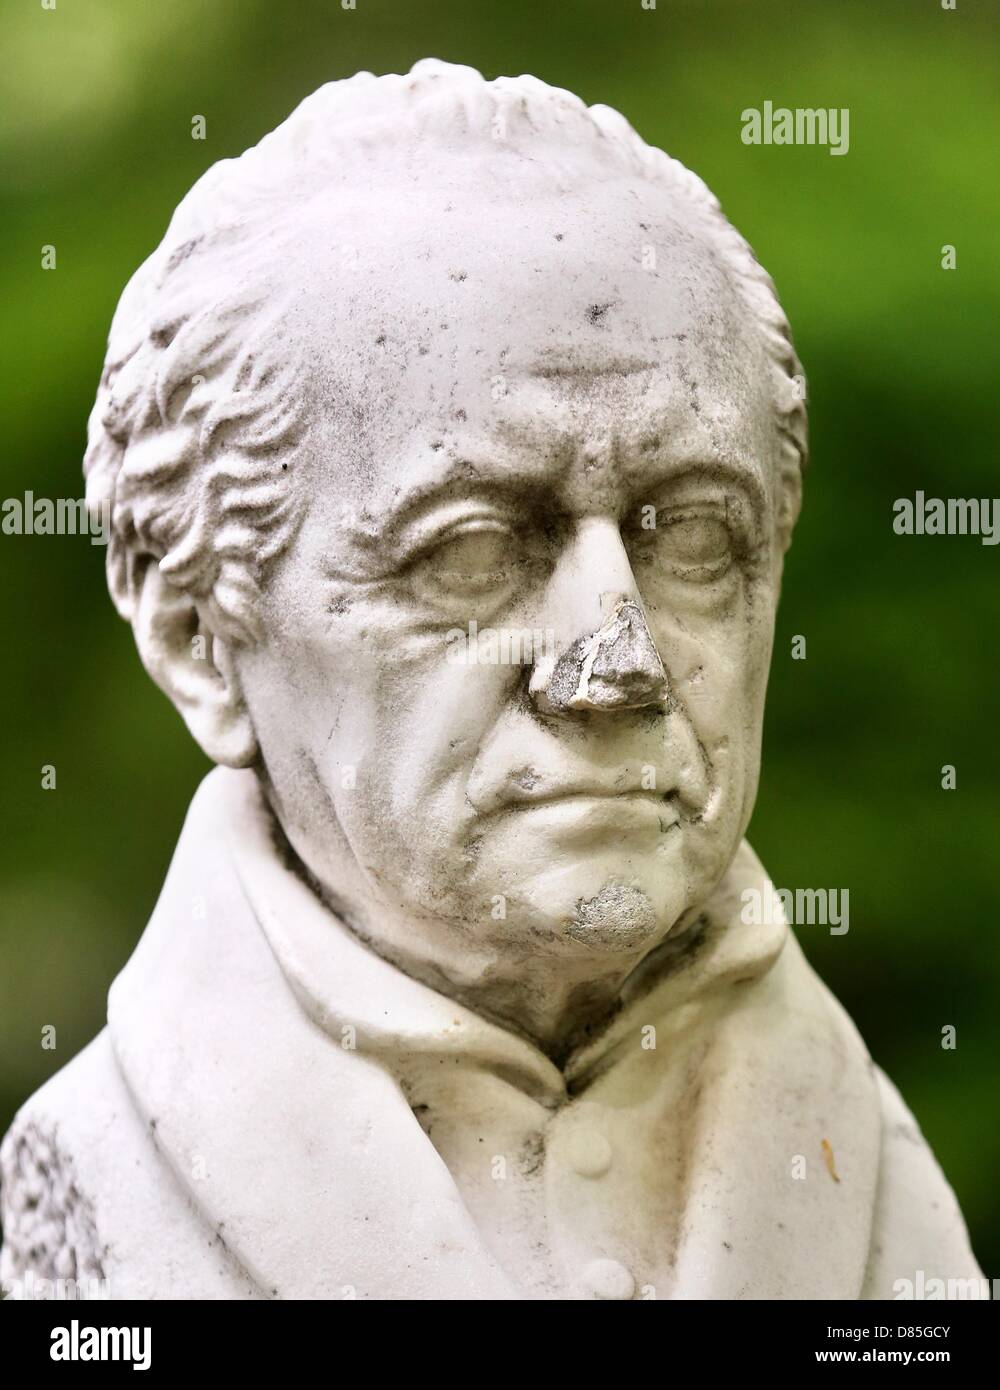 Bust of Johann Wolfgang von Goethe stands in spa town Bad Lauchstaedt in Germany, 10 May 2013. There is a famous mineral spring in the city, which Goethe used to visit frequently. Photo: Jan Woitas Stock Photo